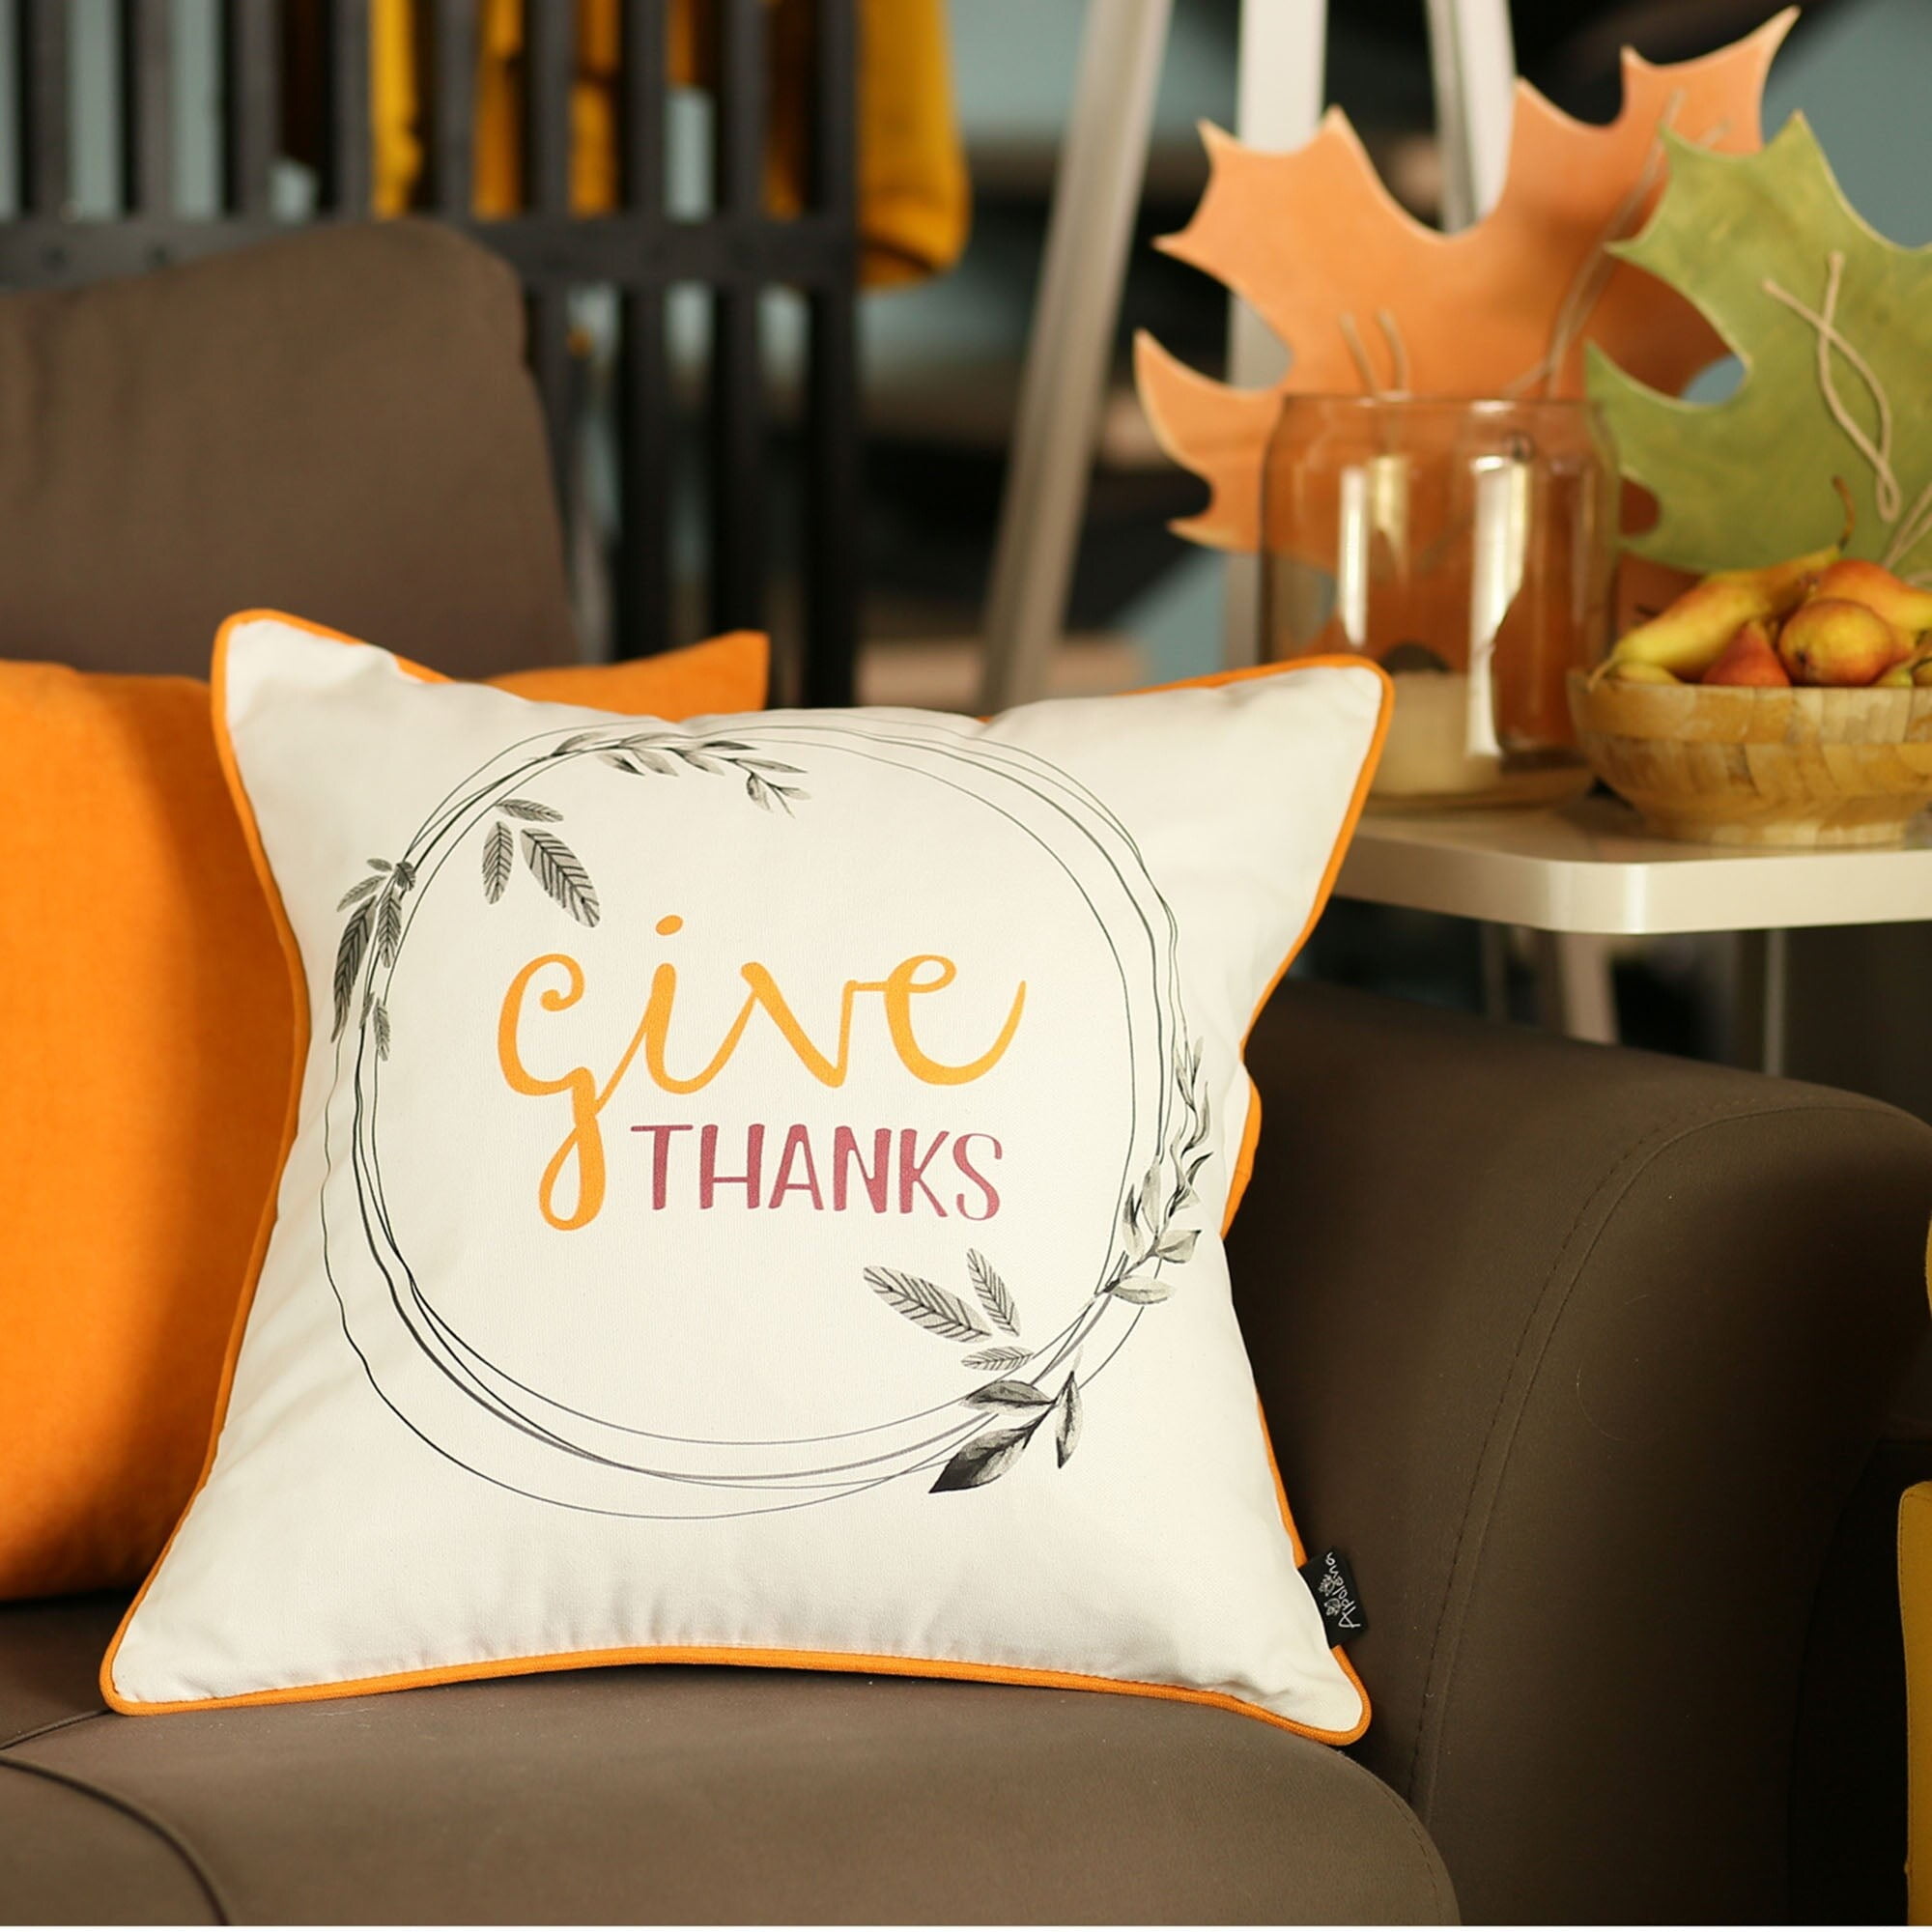 Make customized pillow by Cricut for Thanksgiving